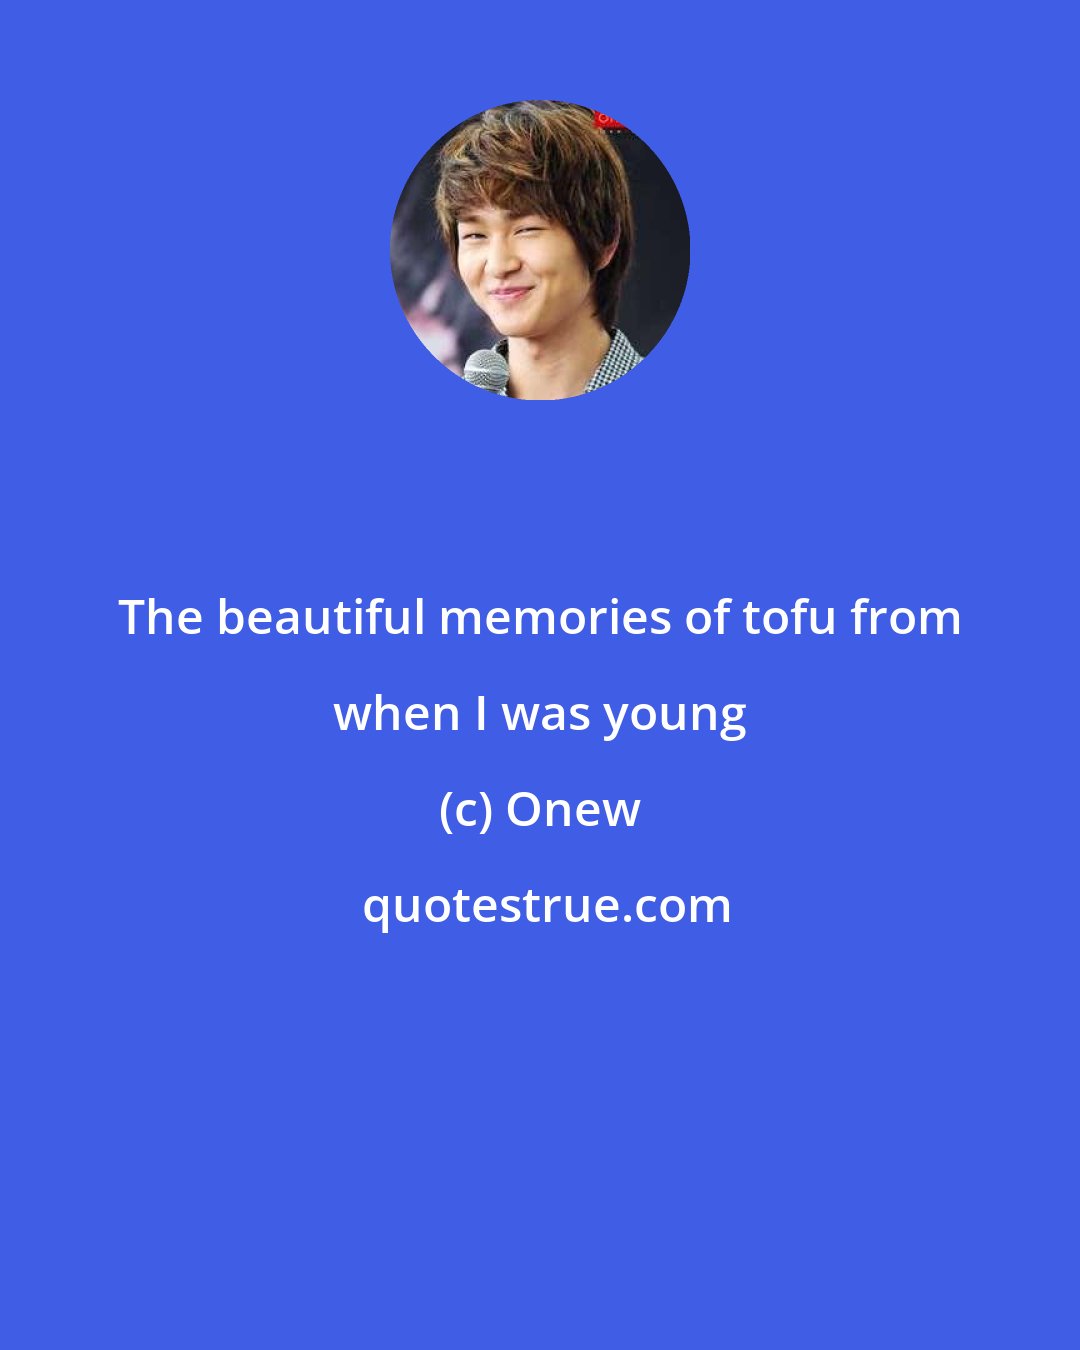 Onew: The beautiful memories of tofu from when I was young